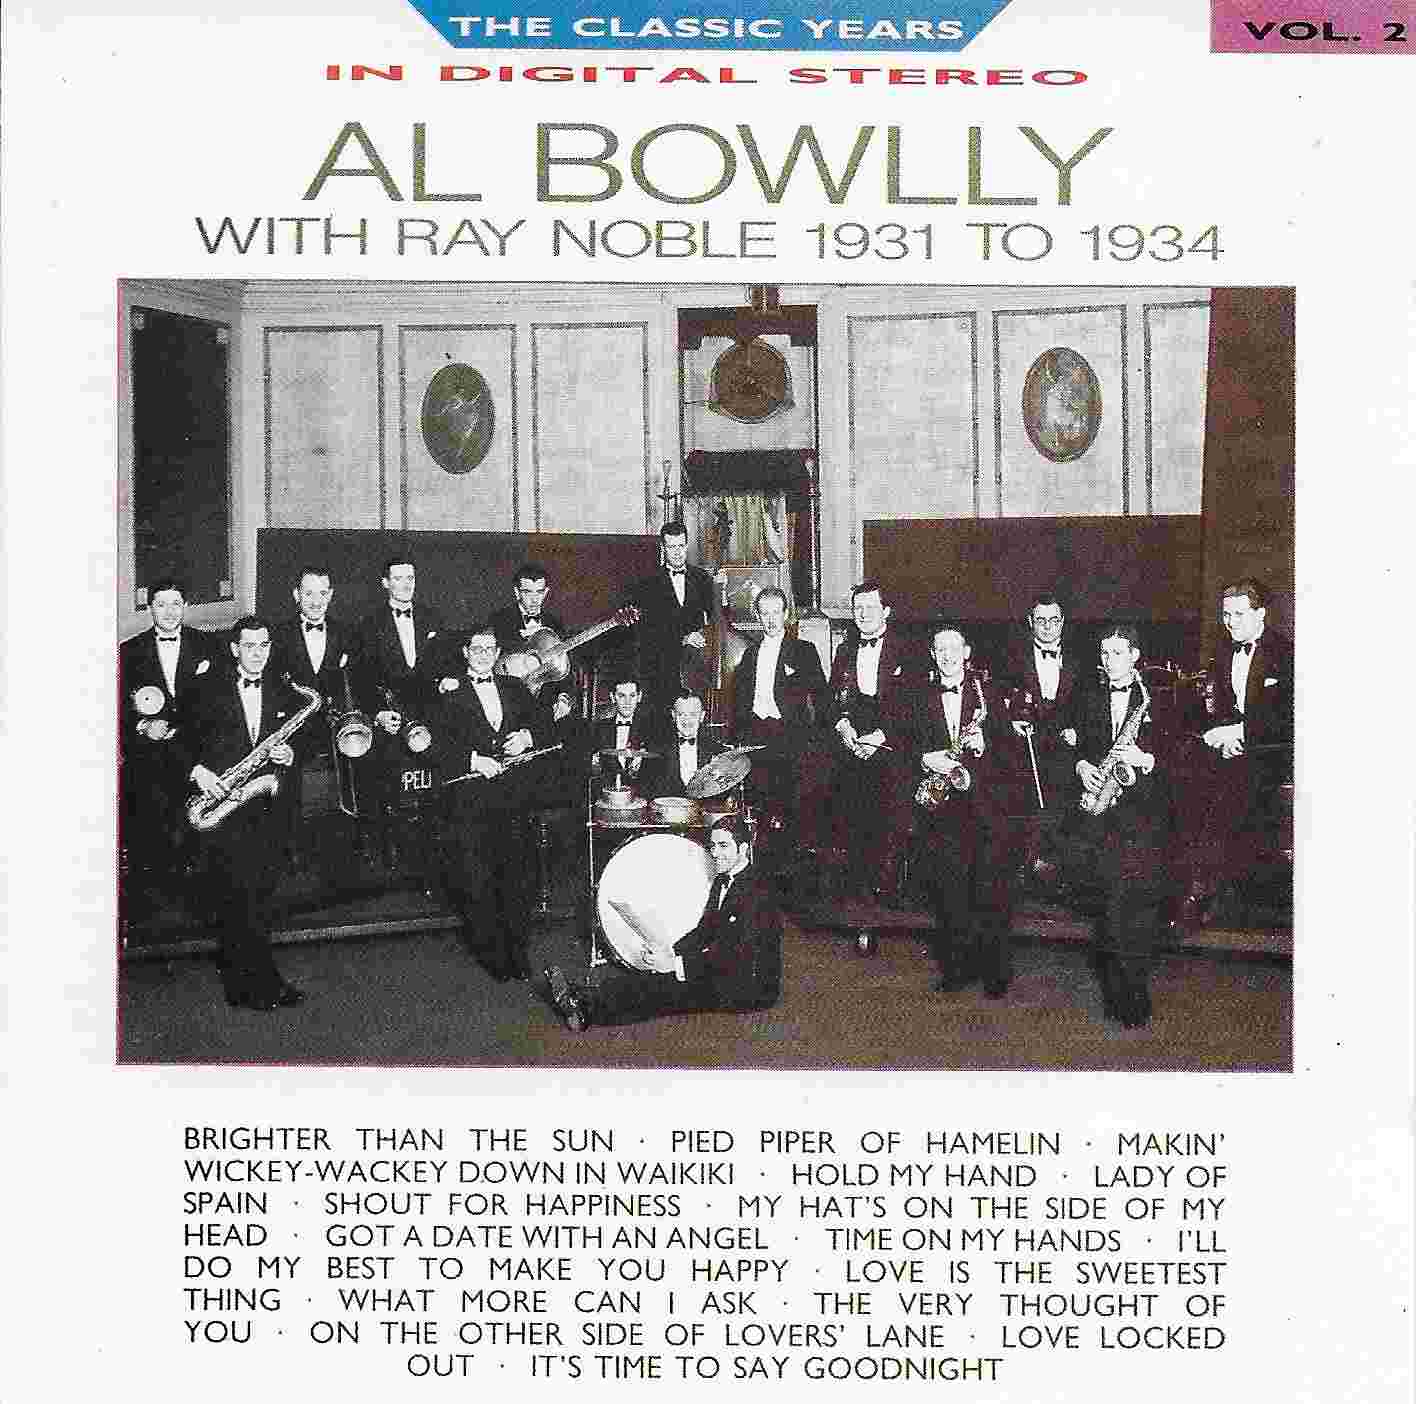 Picture of Classic years - Volume 2, Al Bowlly by artist Al Bowlly from the BBC cds - Records and Tapes library